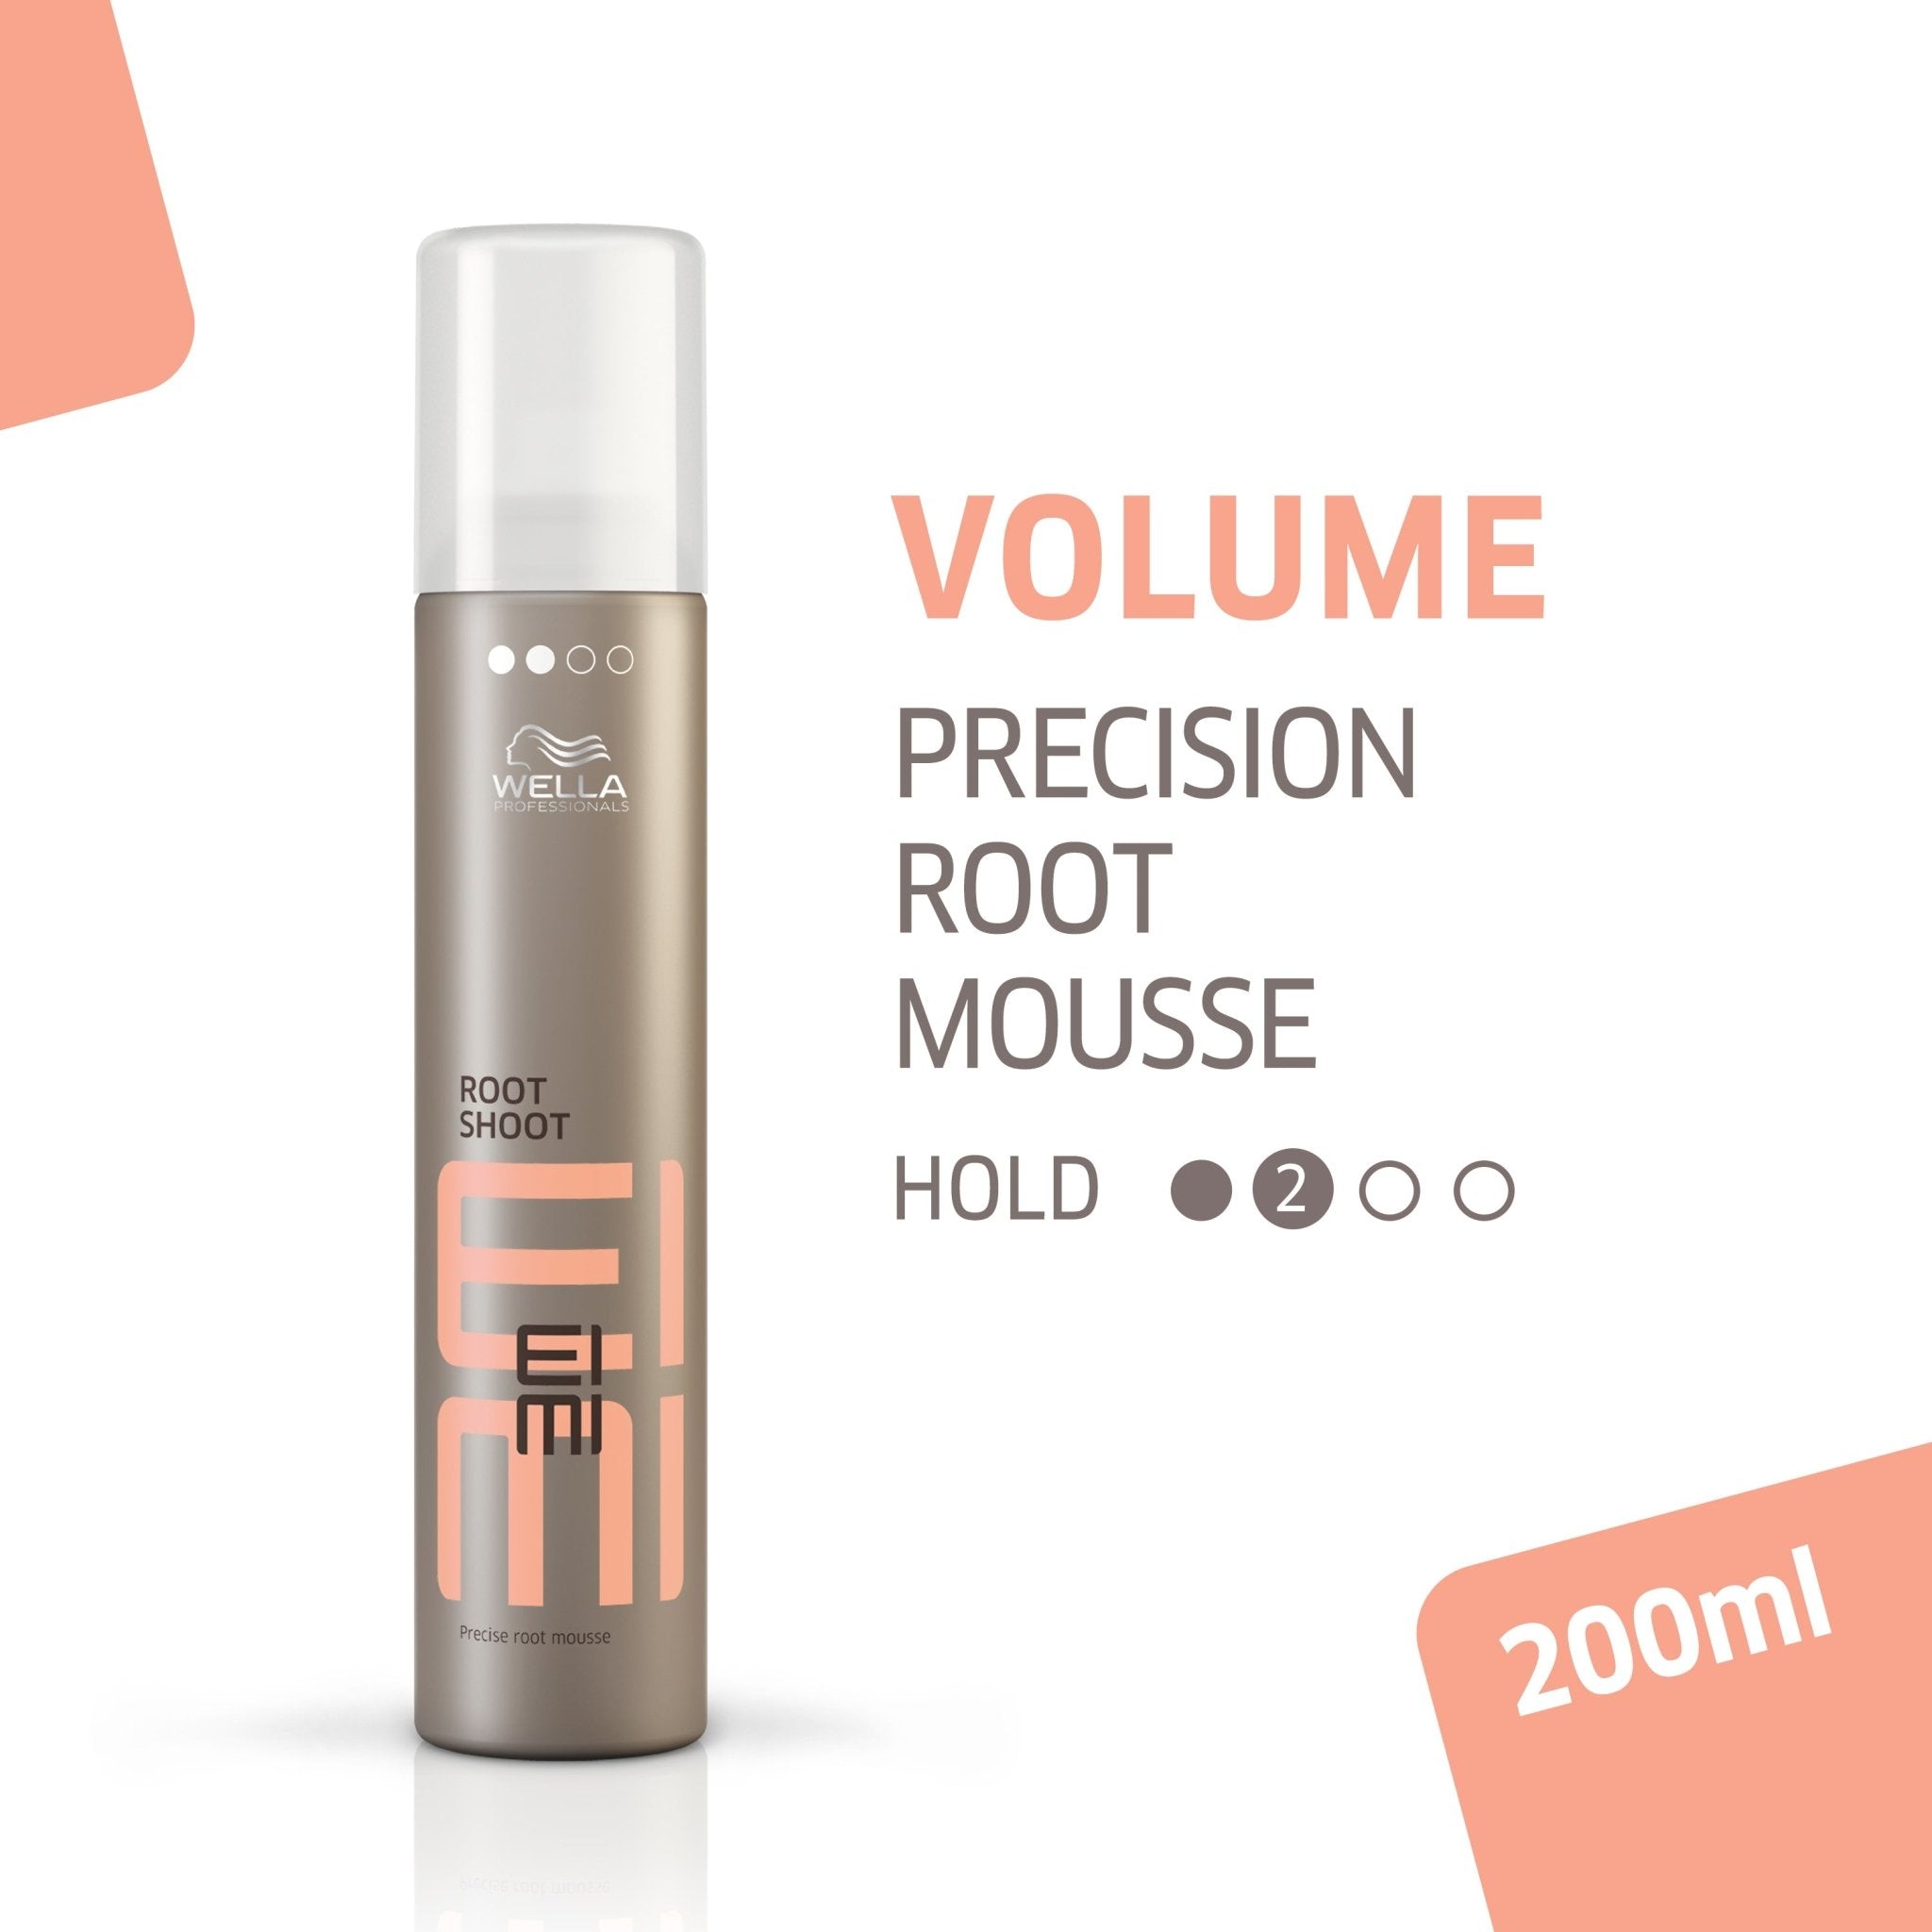 Root Shoot Hair Mousse | Styling | EIMI | WELLA | SH Salons